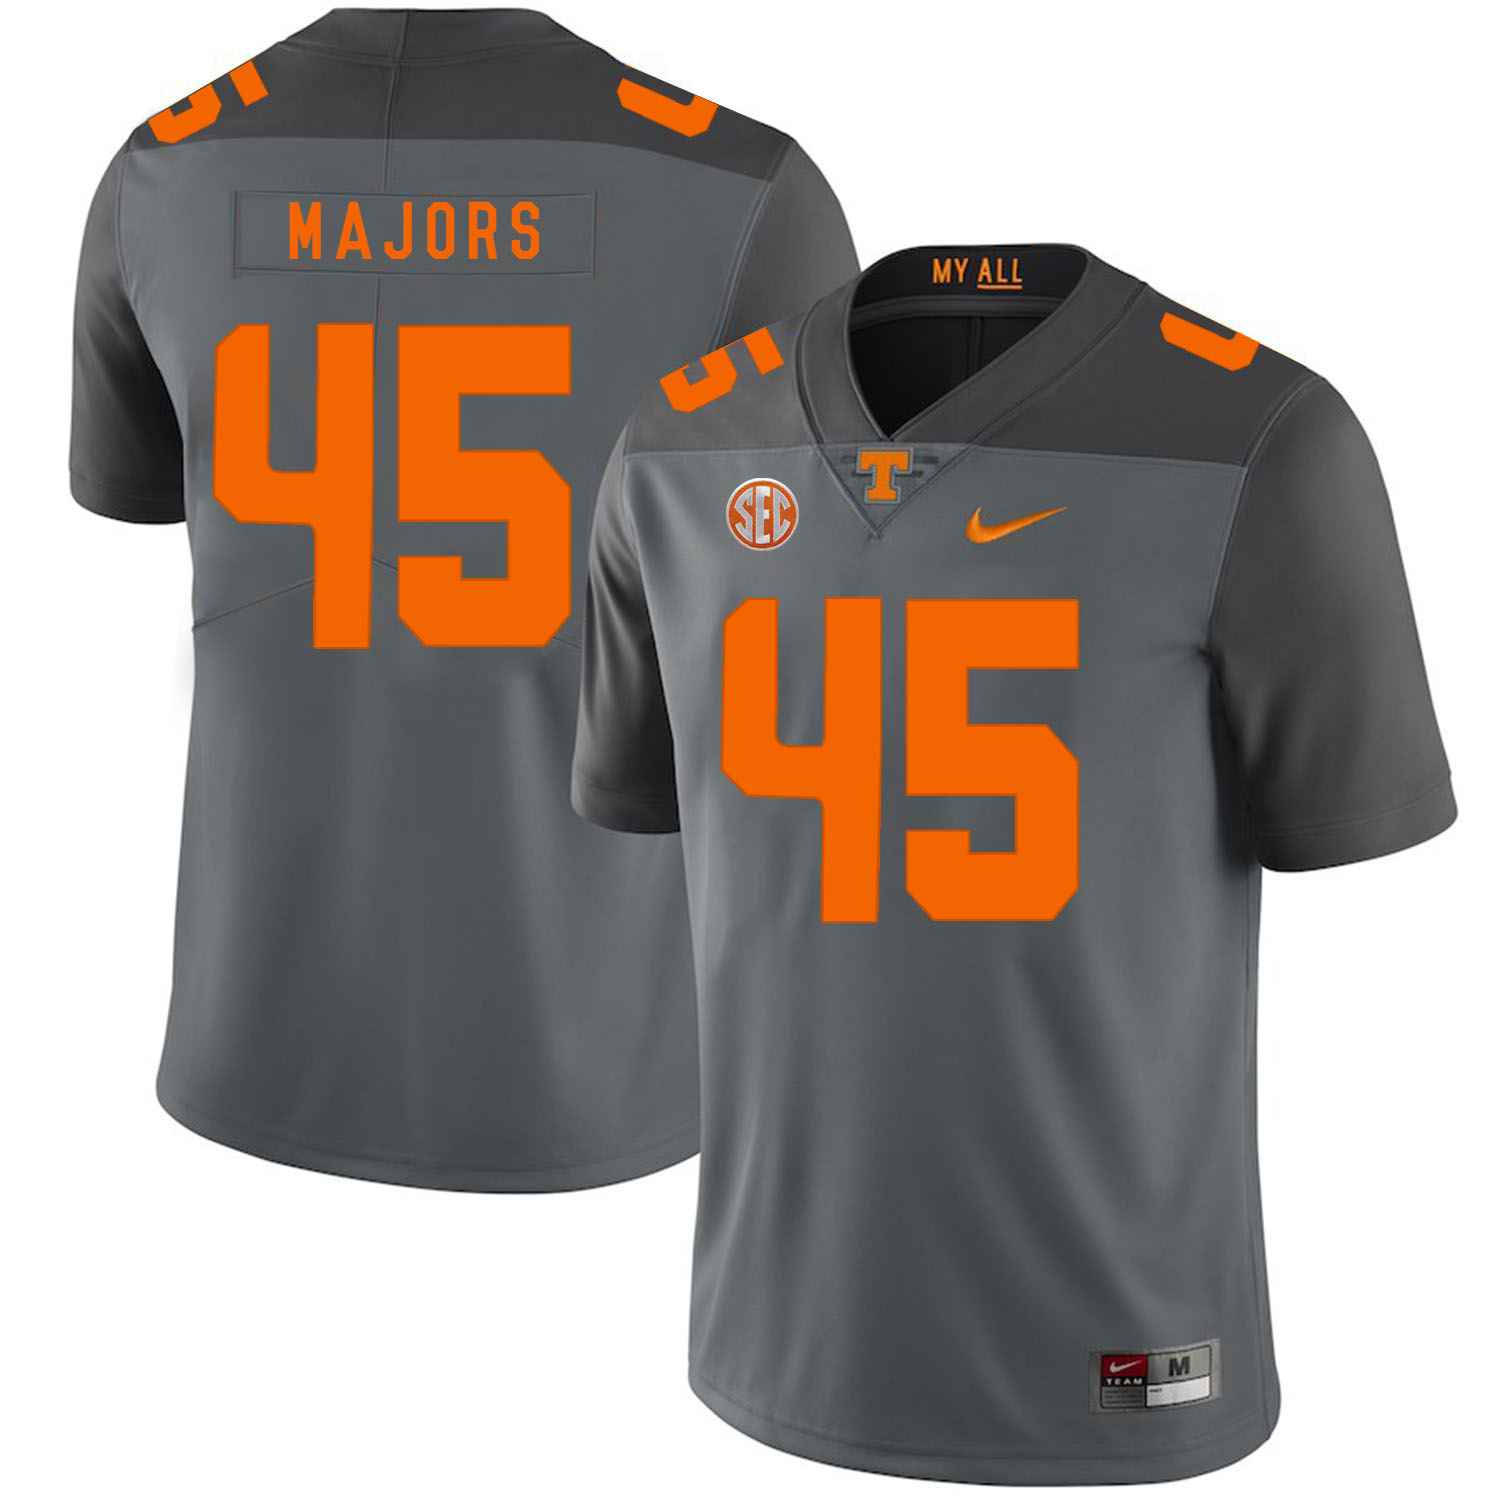 Tennessee Volunteers 45 Johnny Majors Gray Nike College Football Jersey